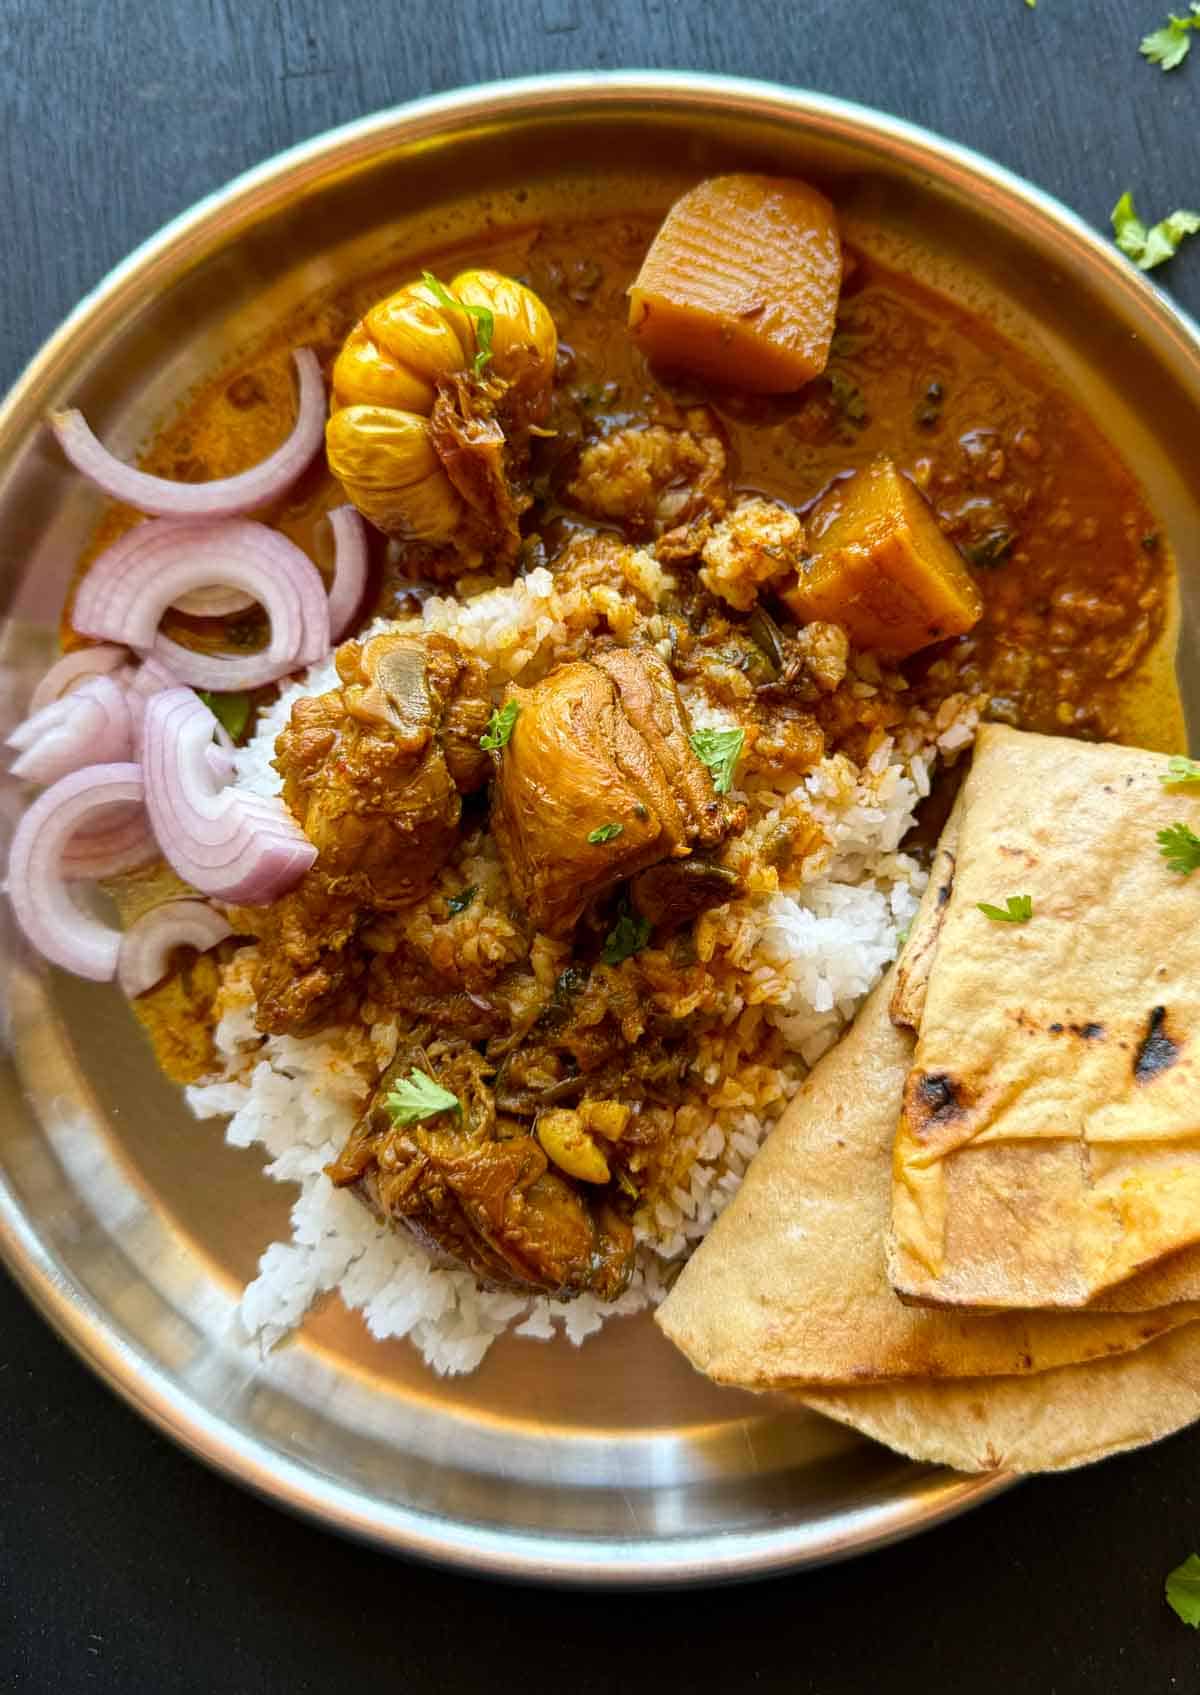 Bihari Chicken curry served on a plate with rice, roti and onions